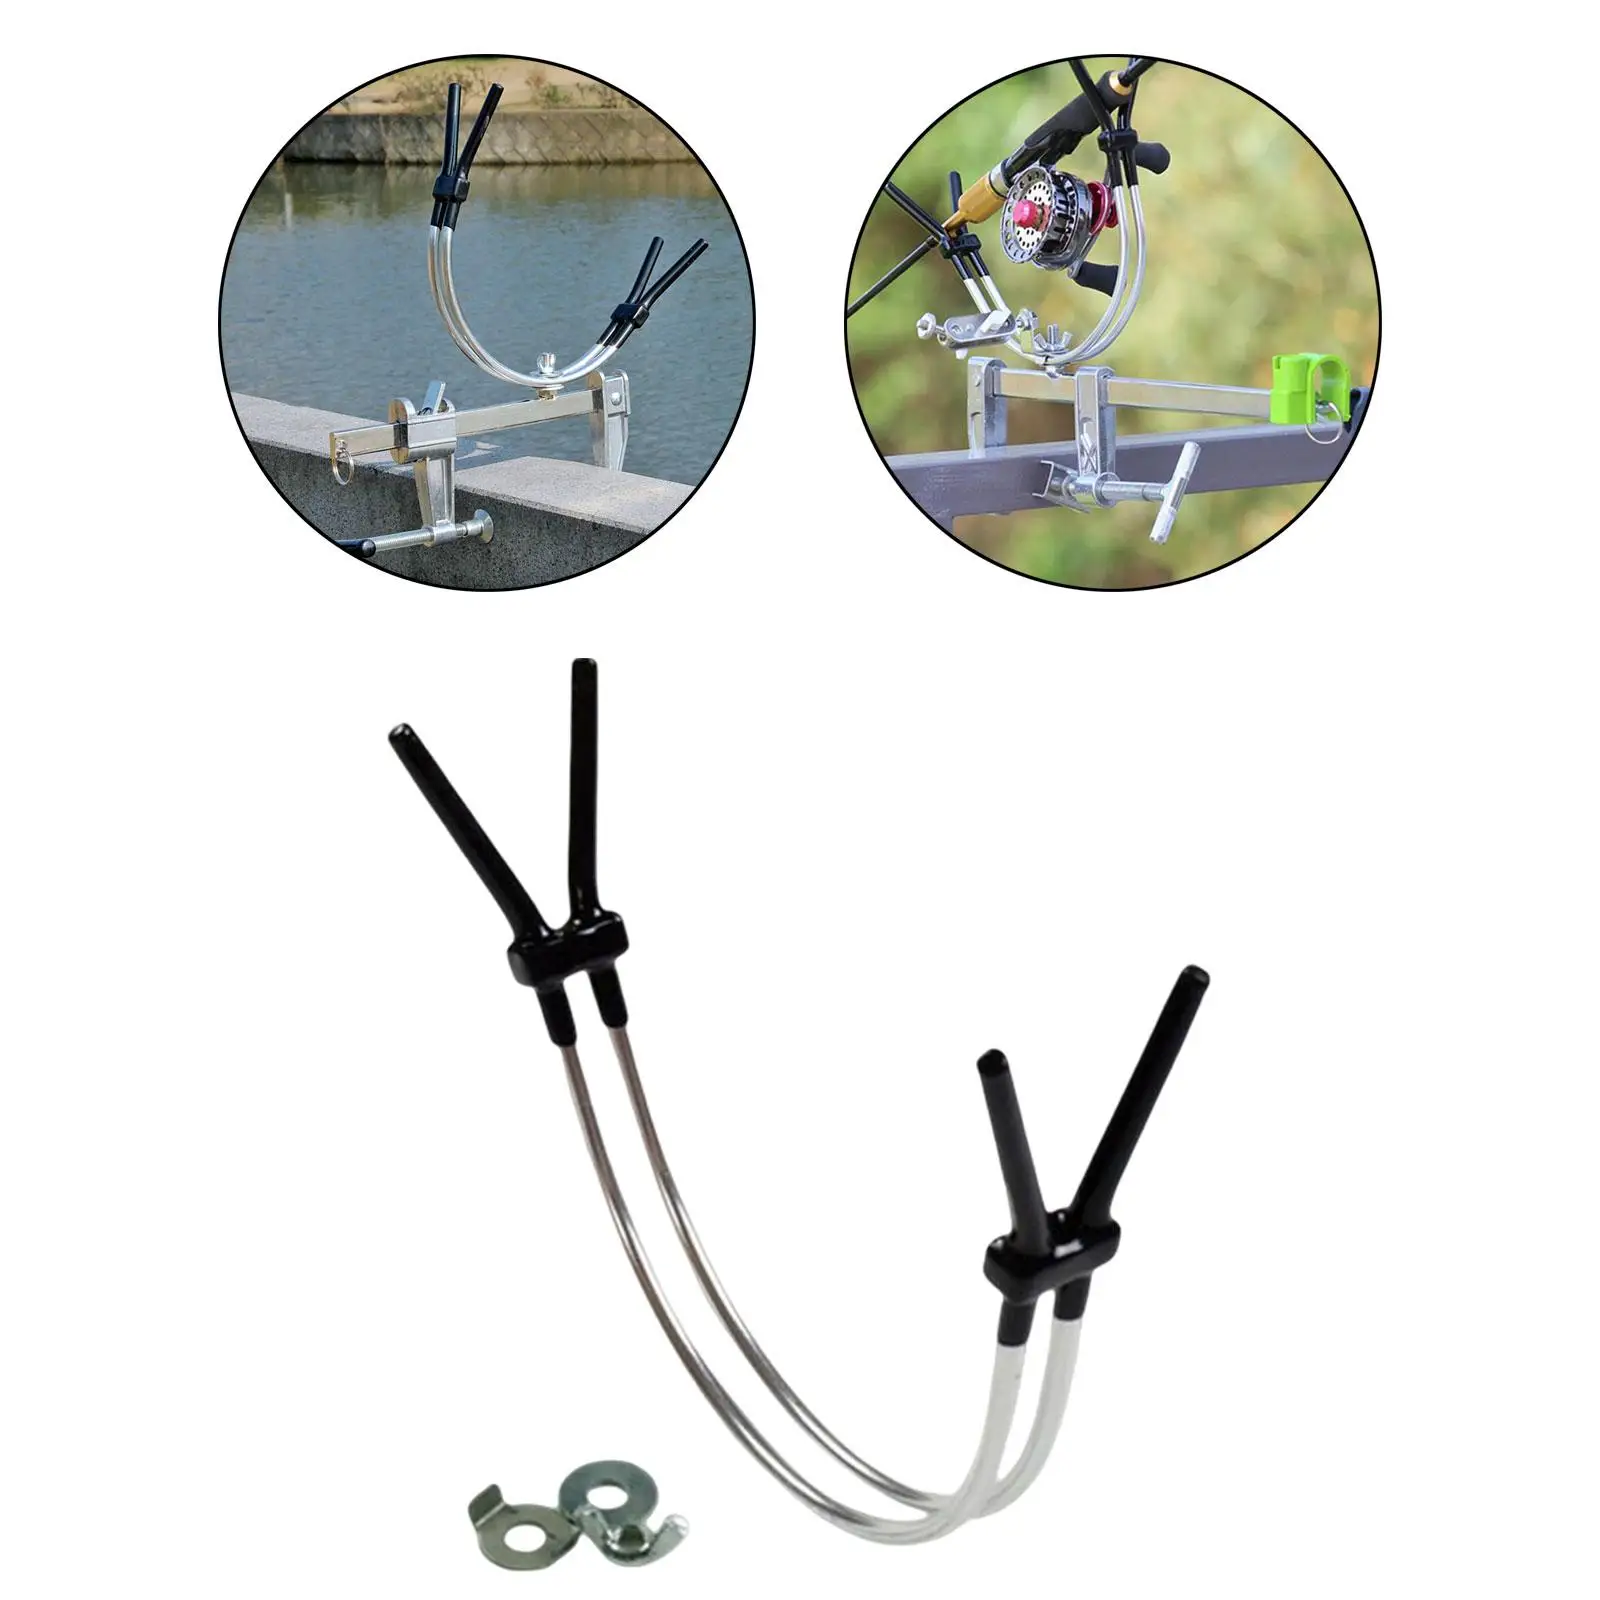 Fishing Rod Holder Fishing Pole Holder Fishing Rod Pole Stand Device Fishing Tackle Tool Fishing Rod Bracket for Boat Fishing